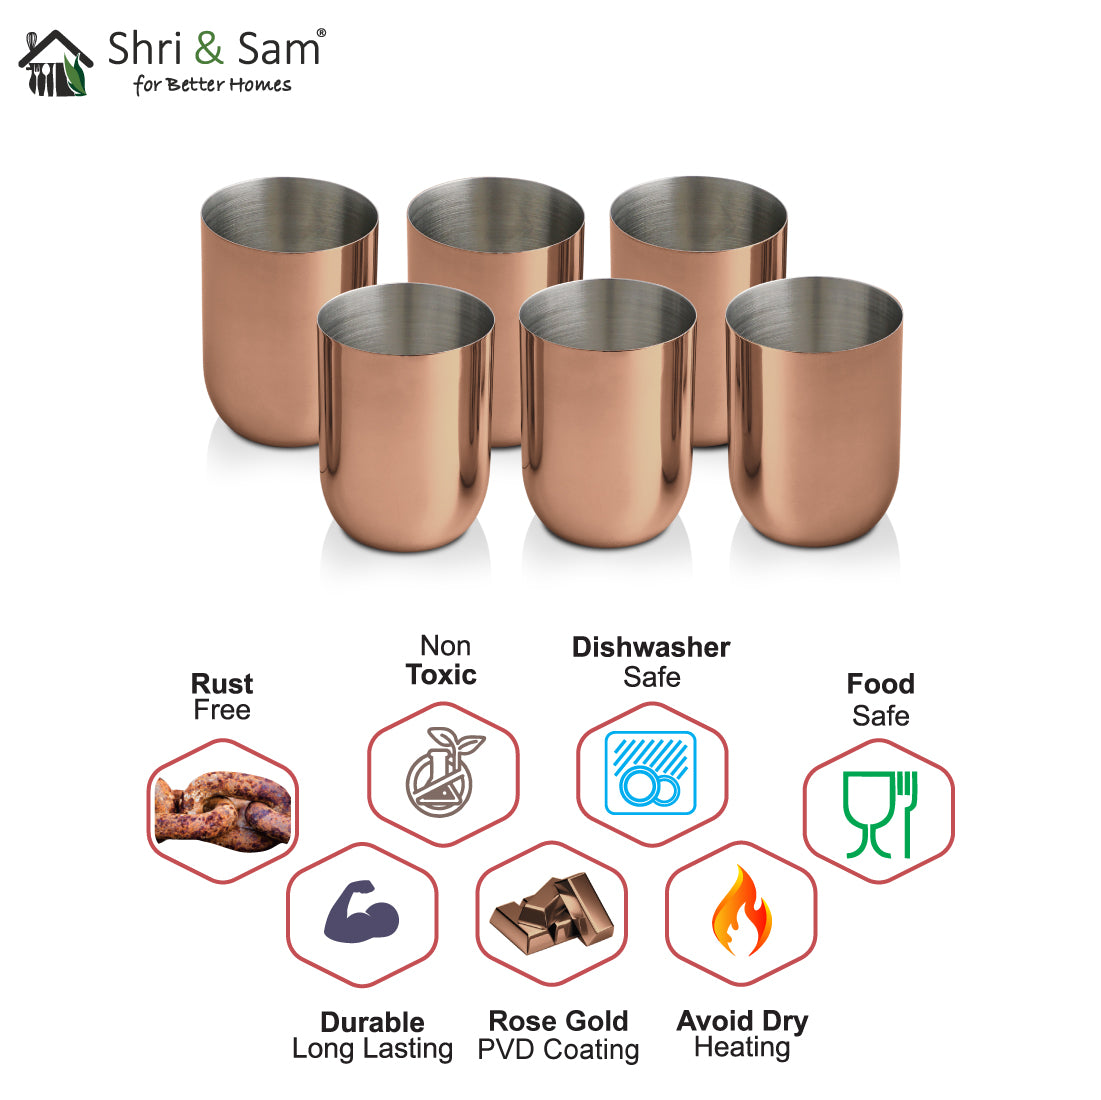 Stainless Steel 6 PCS Glass with Rose Gold PVD Coating Majestic